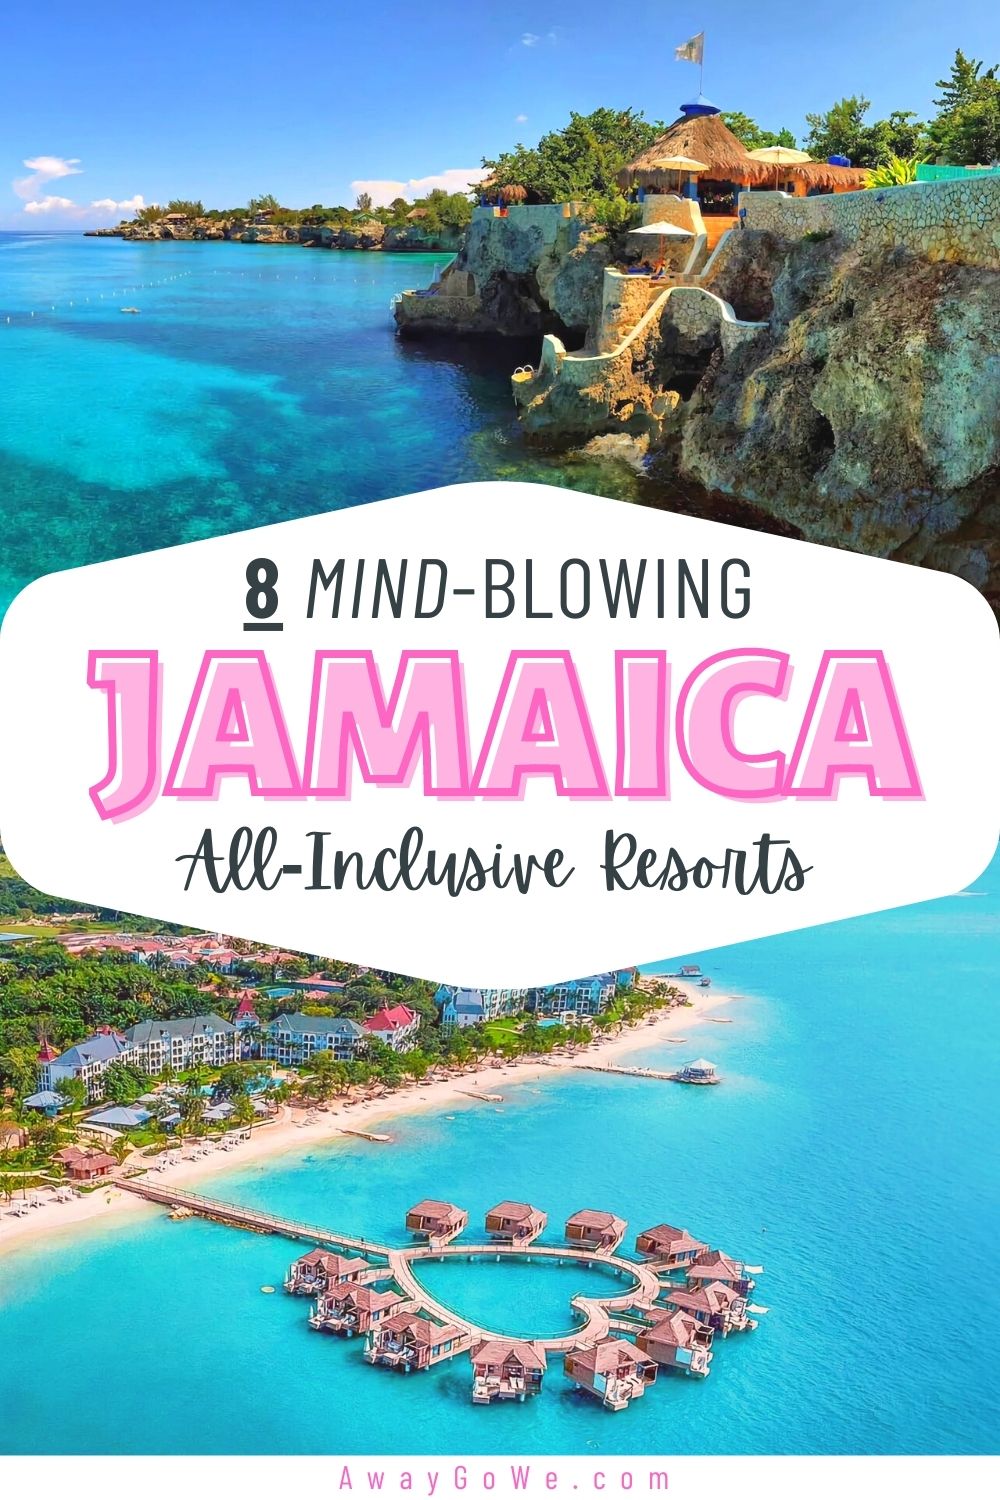 12 Very Best Jamaica All-Inclusive Resorts for 2023